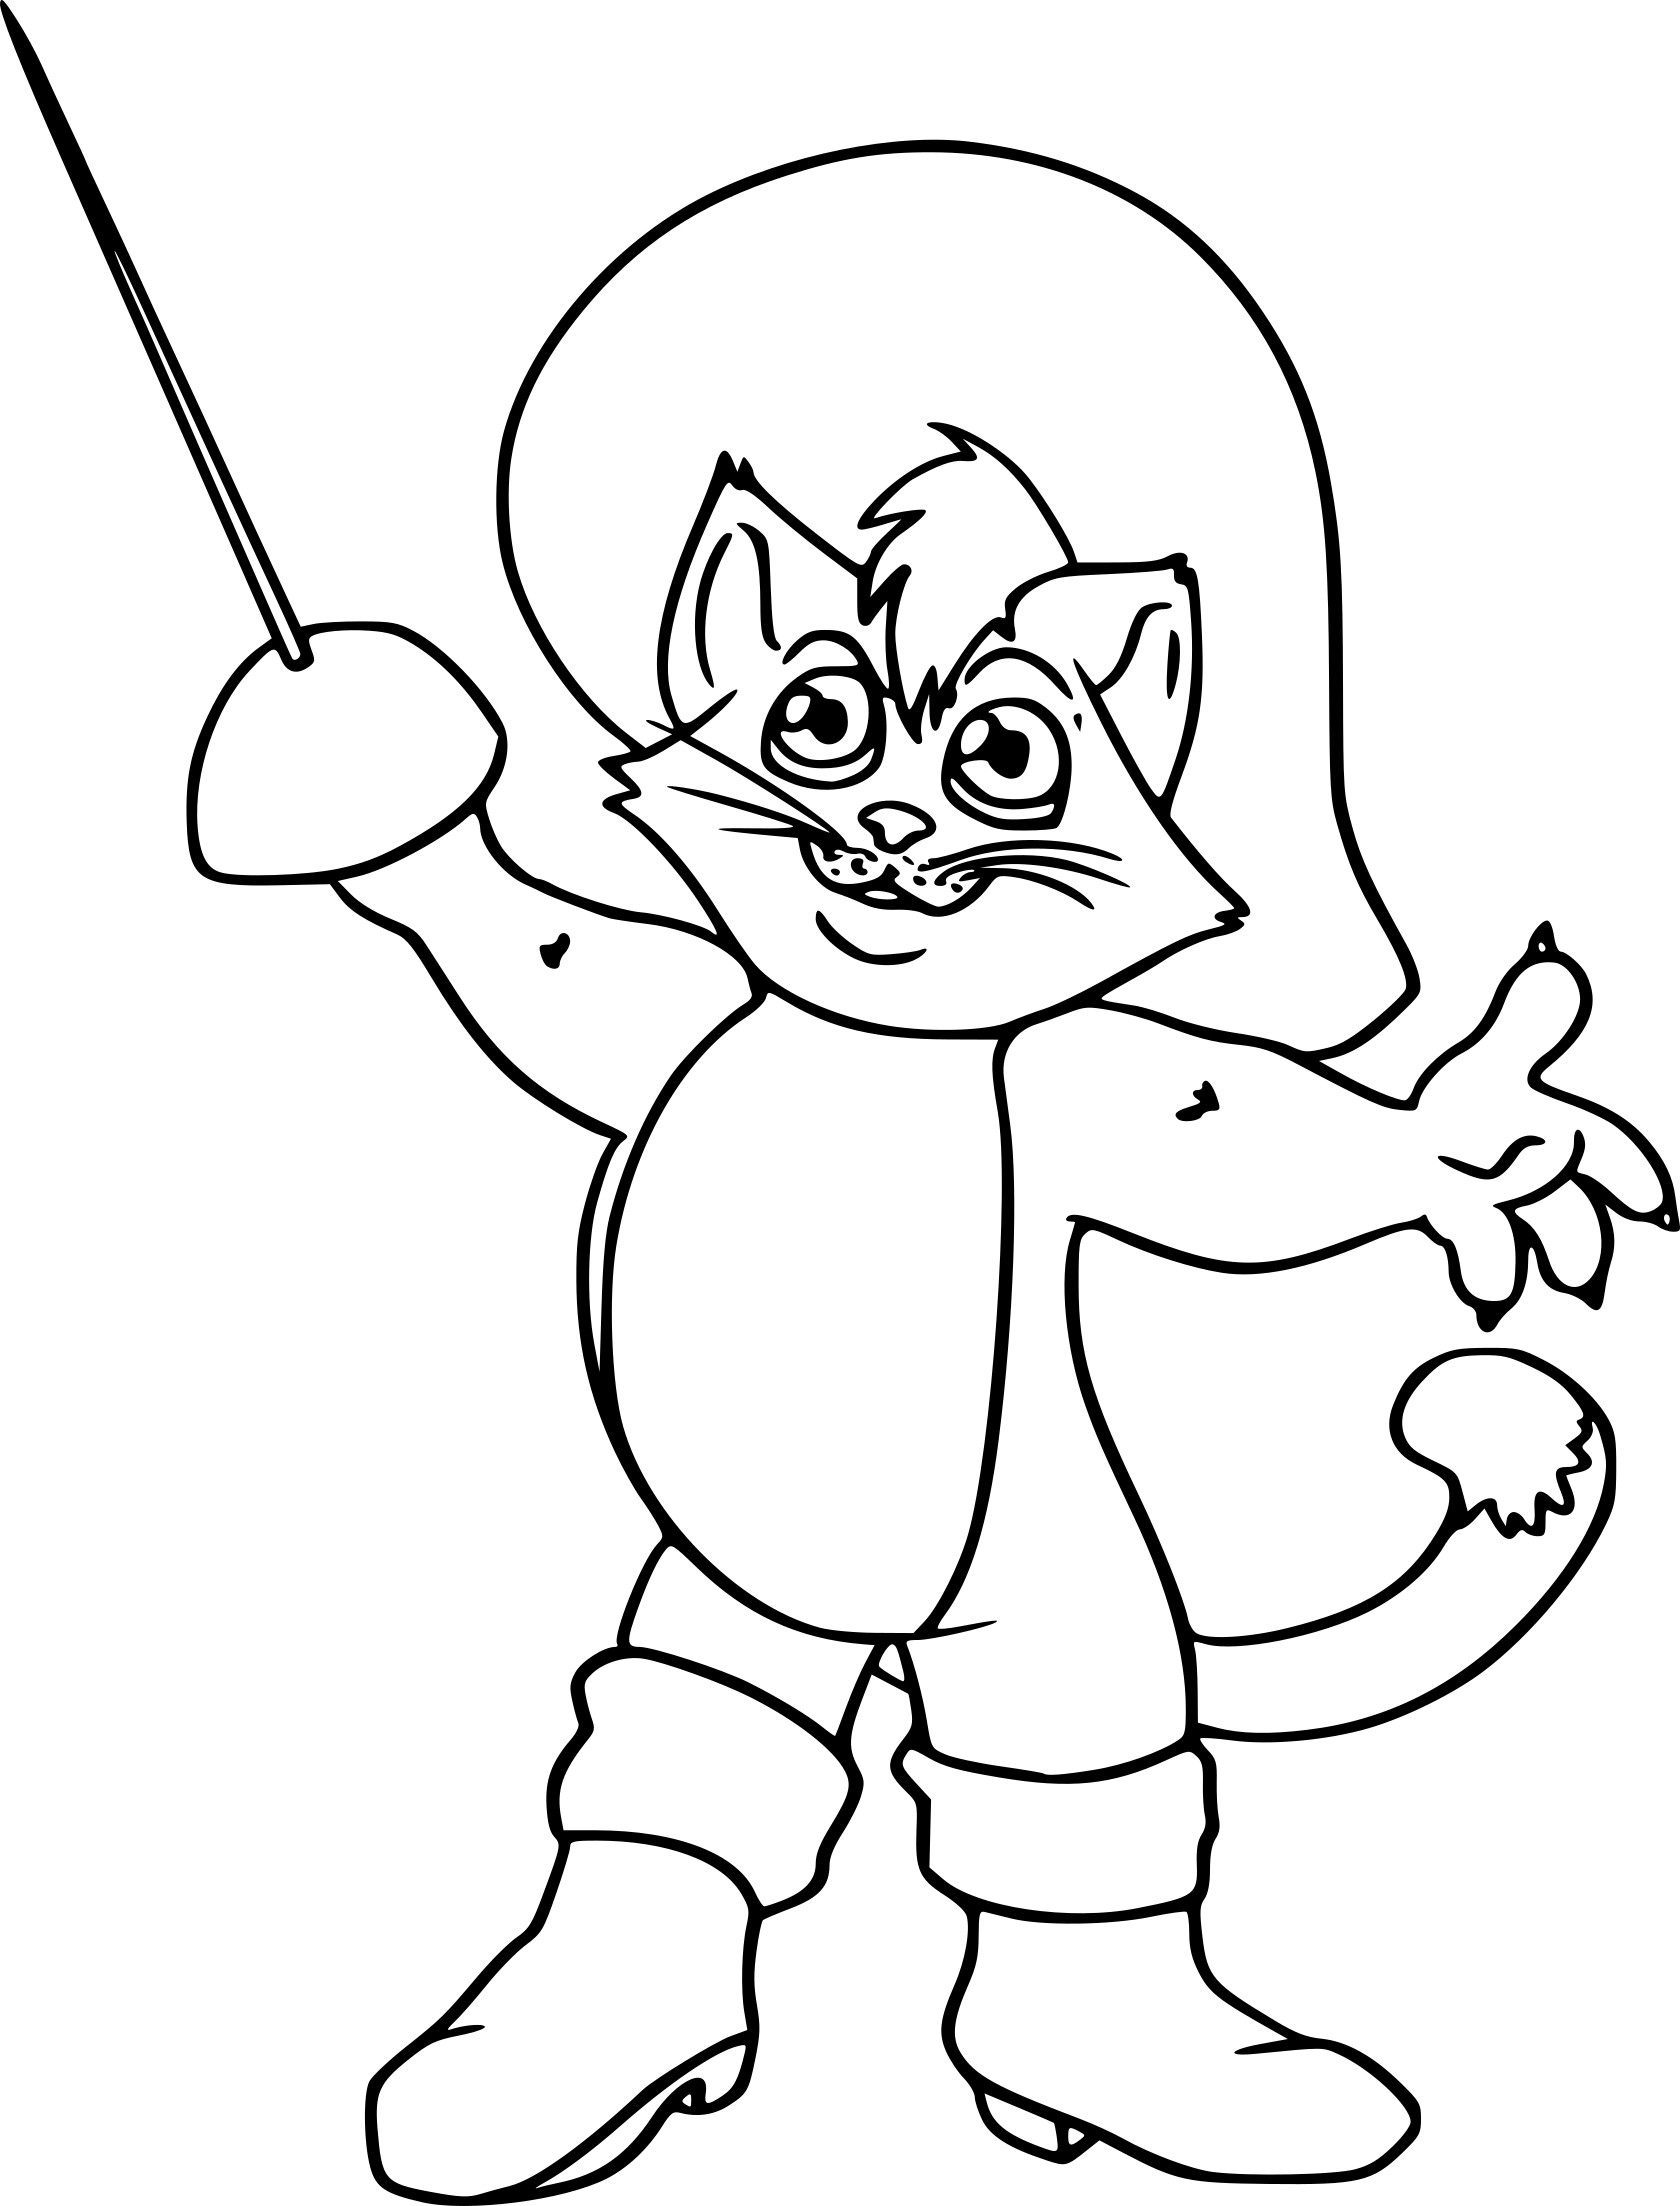 Coloring page: Puss in Boots (Animation Movies) #170611 - Free Printable Coloring Pages